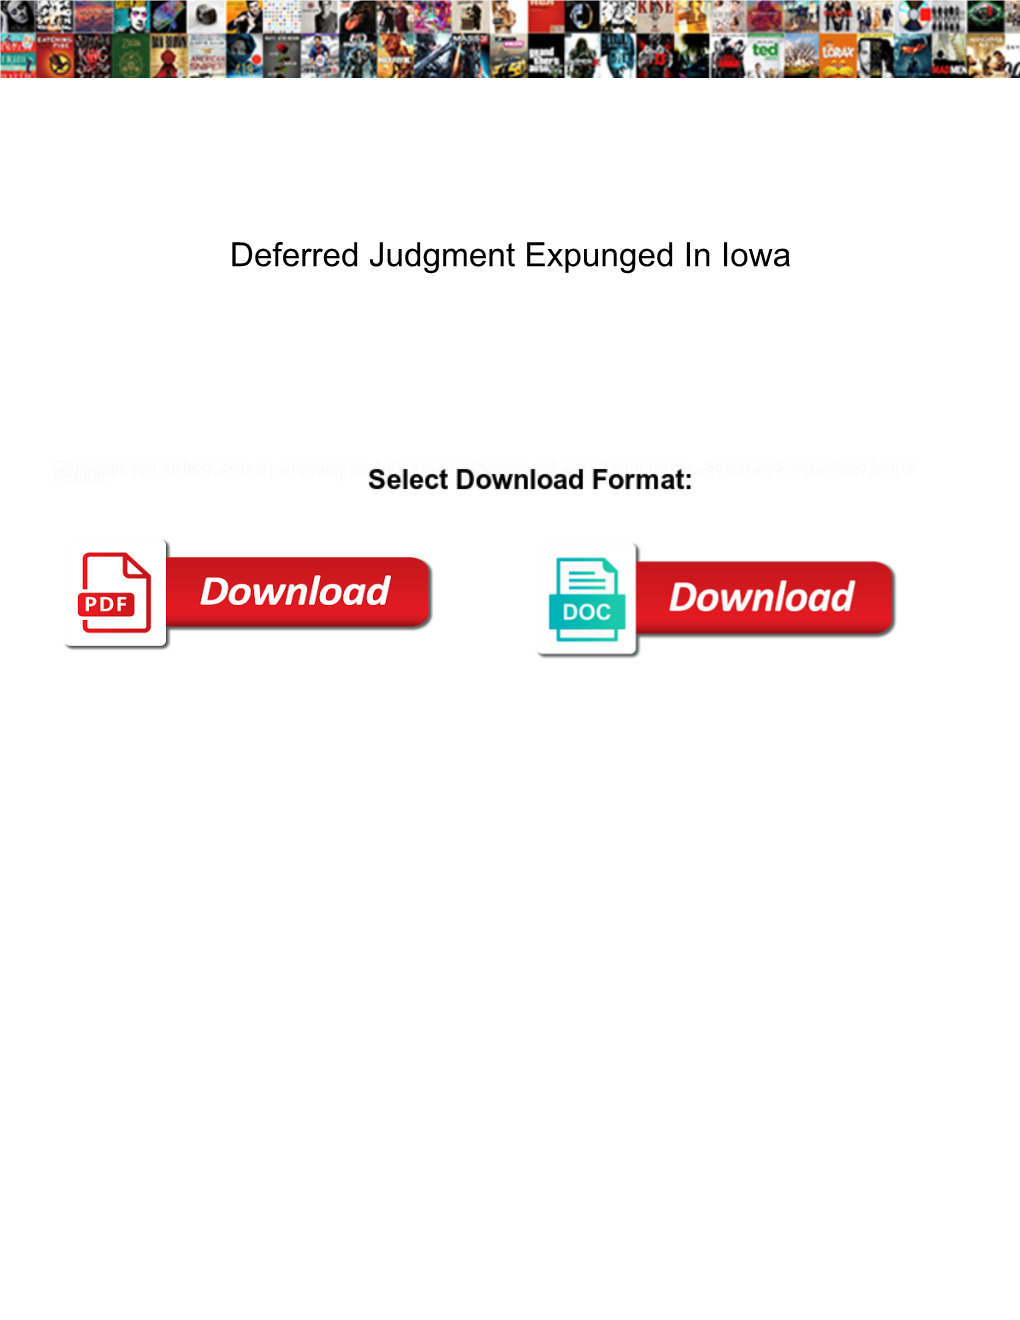 Deferred Judgment Expunged in Iowa